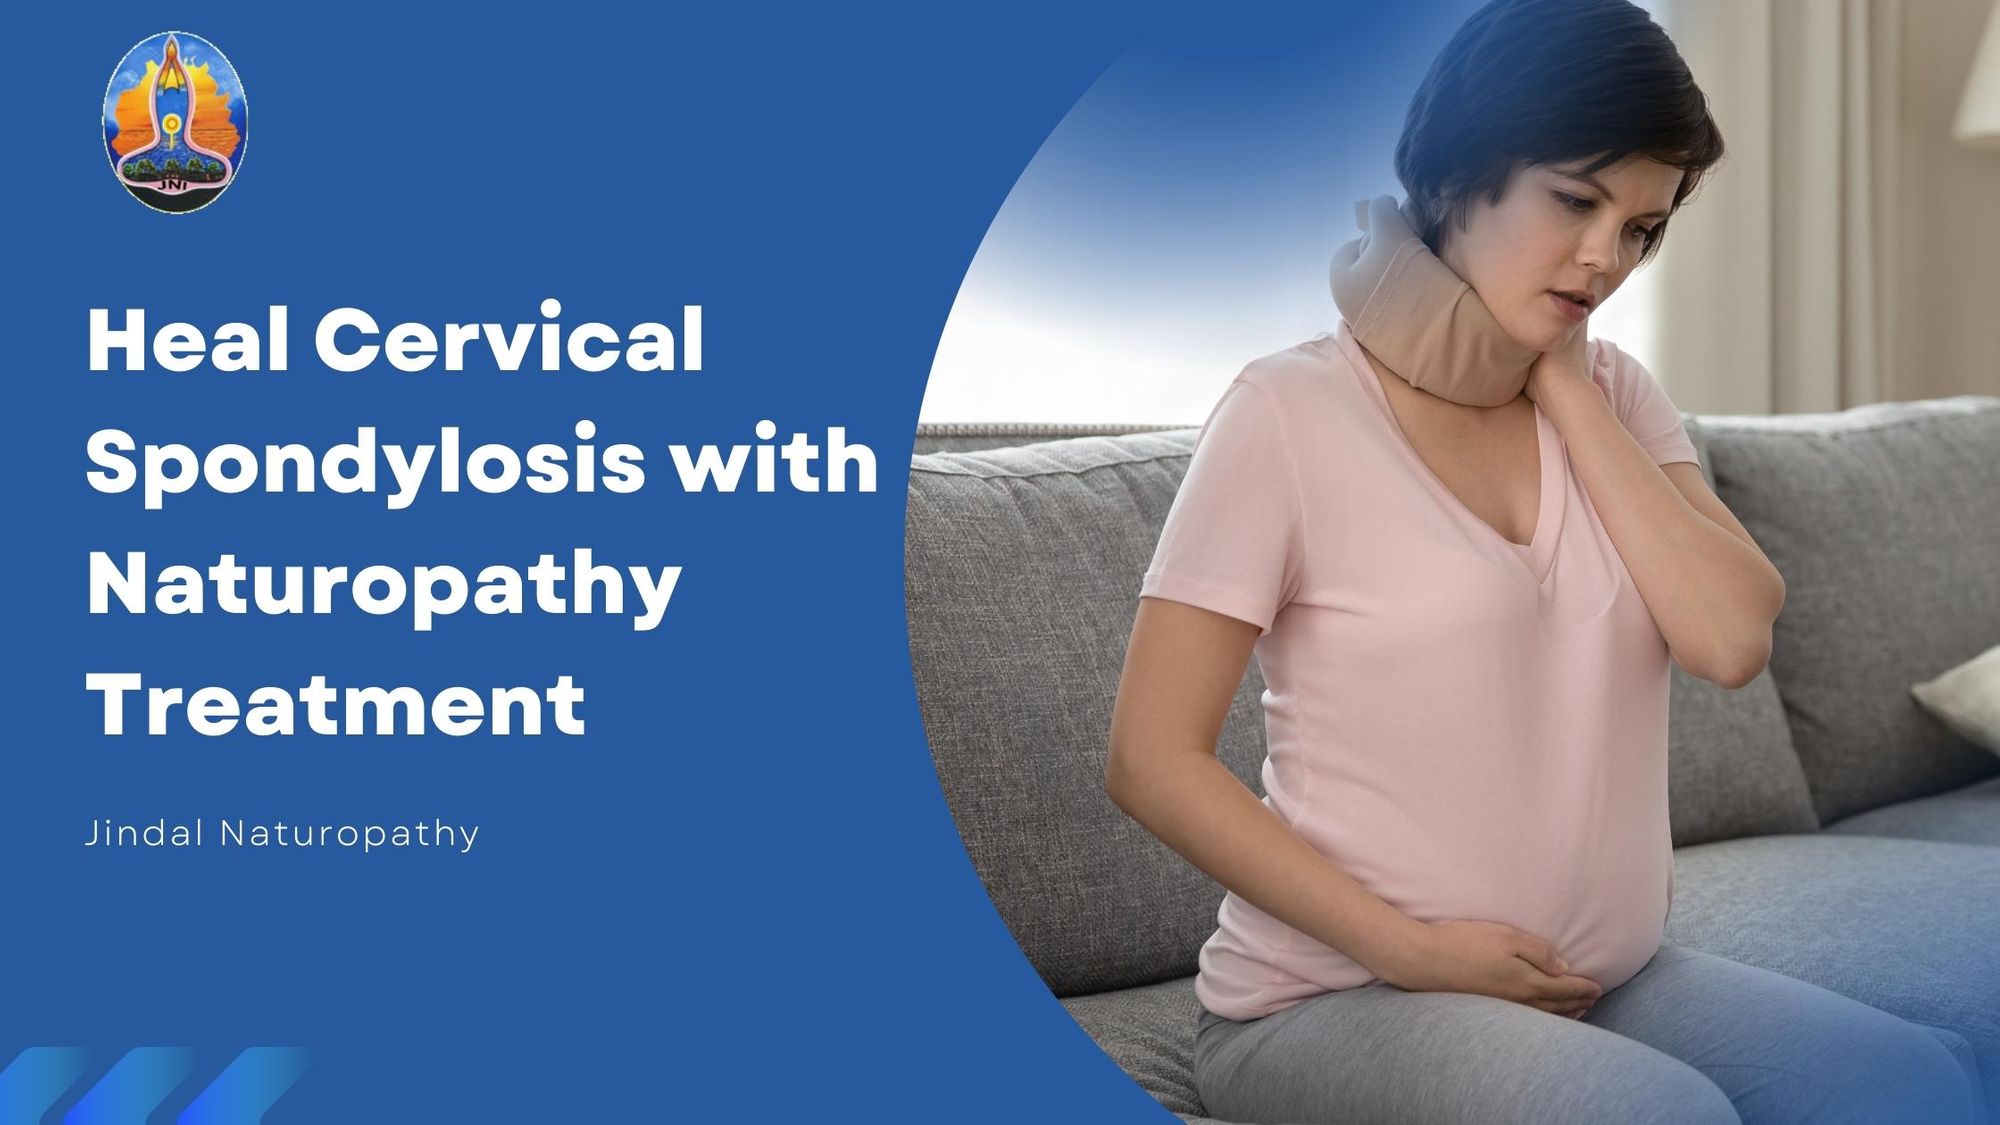 Heal Cervical Spondylosis with Naturopathy Treatment